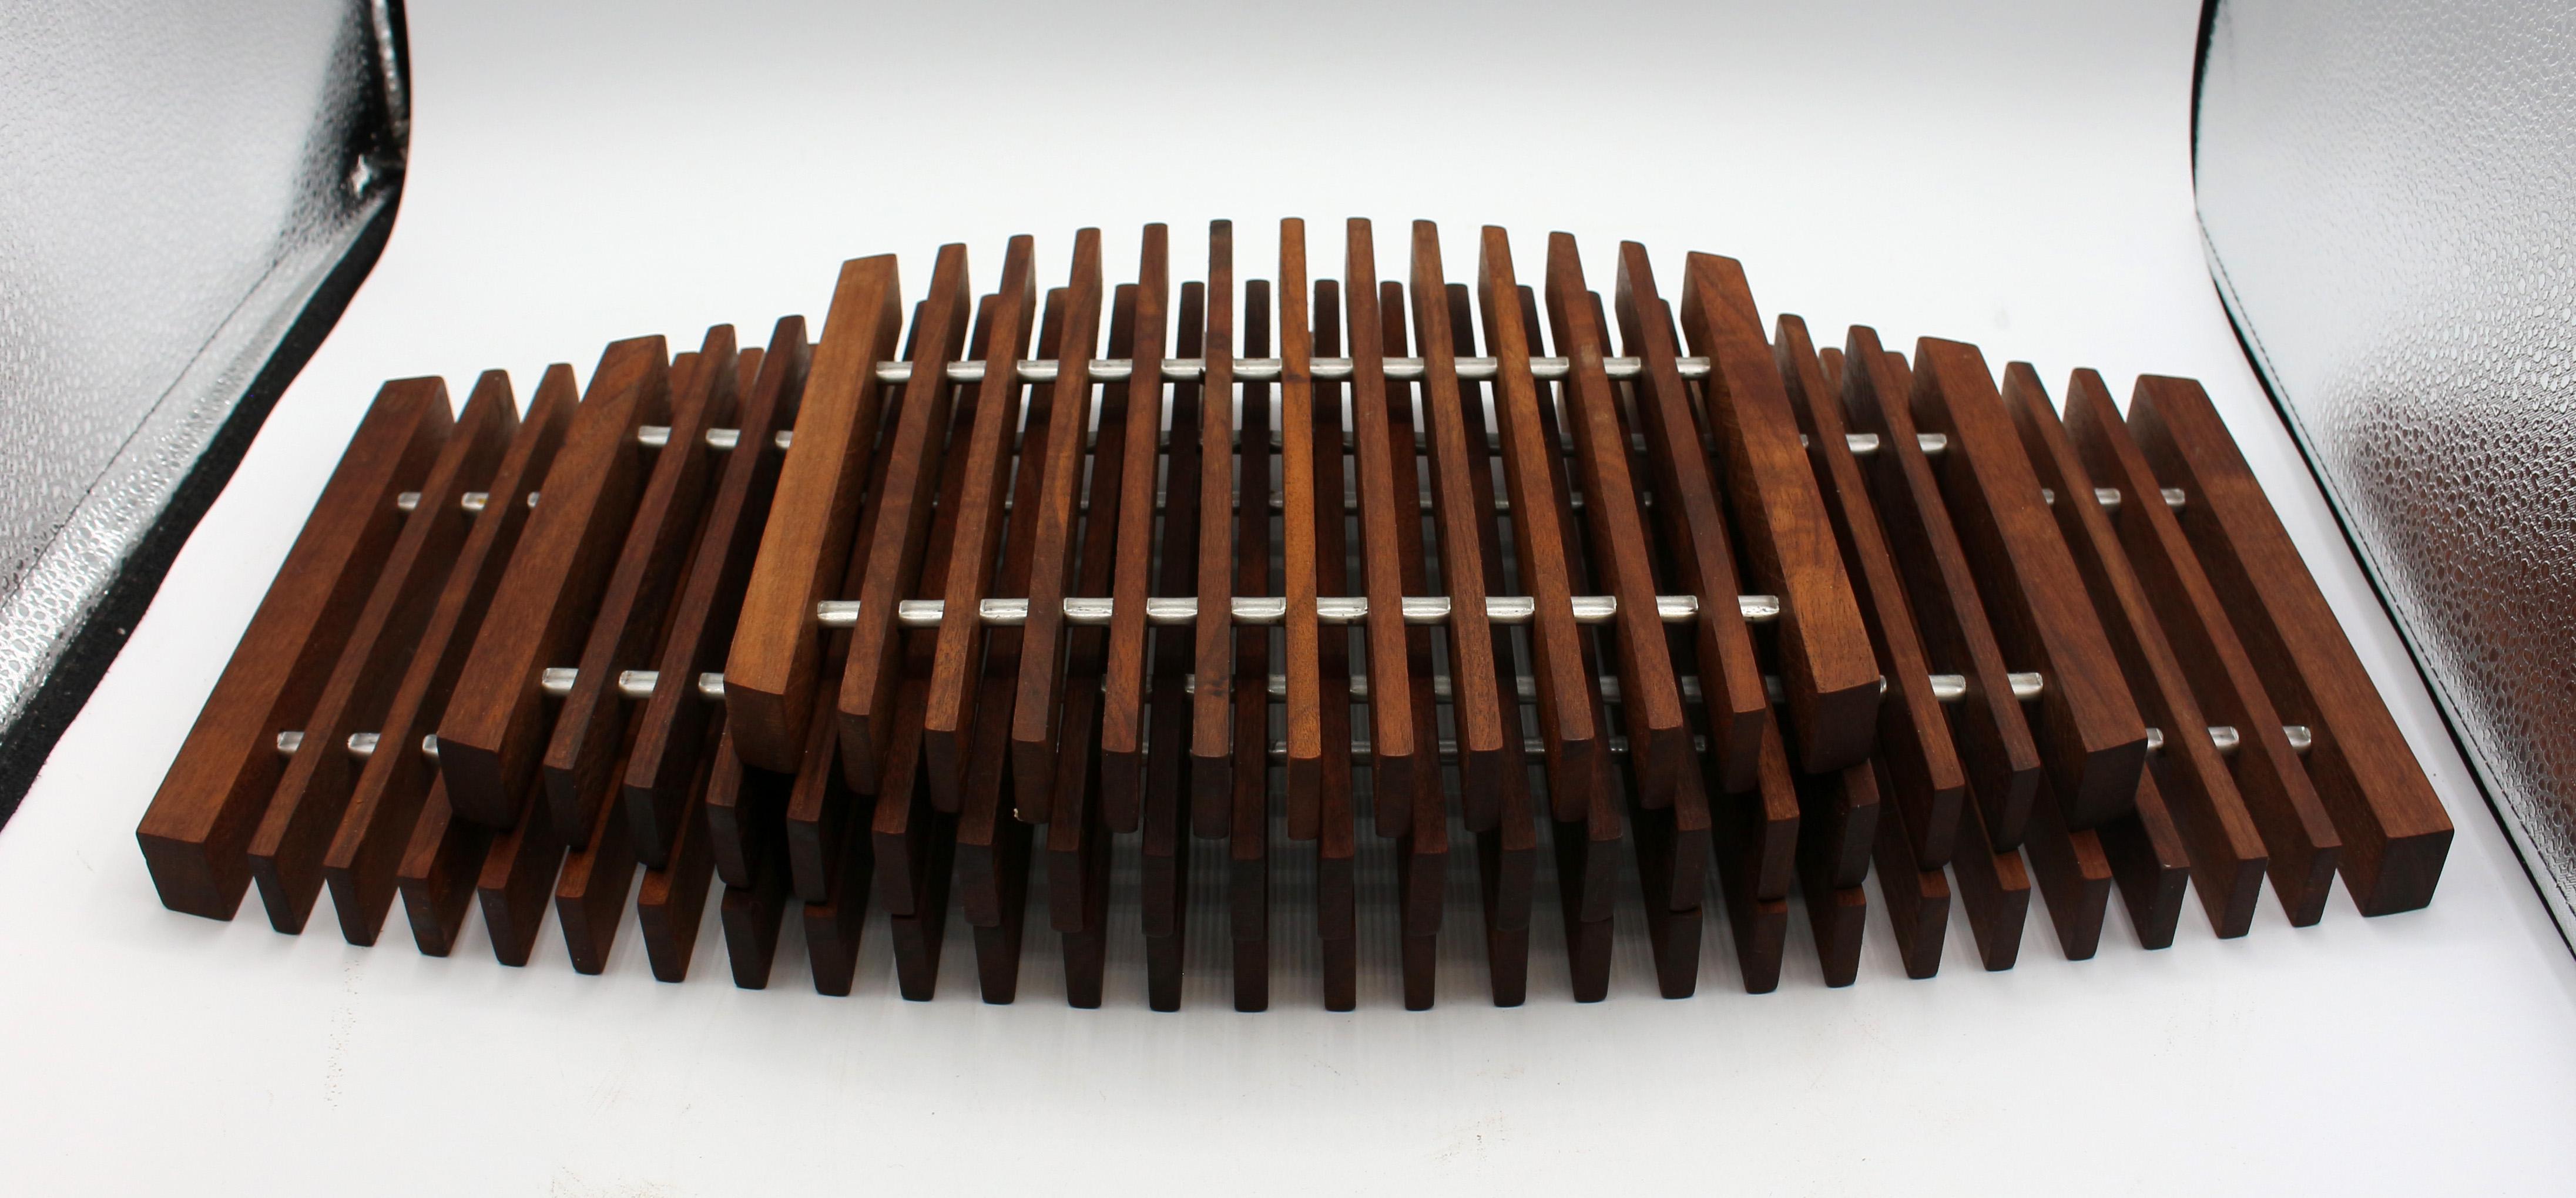 Set of 3 teak & aluminum fishbone trivets, mid century modern, Danish. From a Palm Springs modernism collection, c.1960s. A rare find.
Graduated from 8 3/16